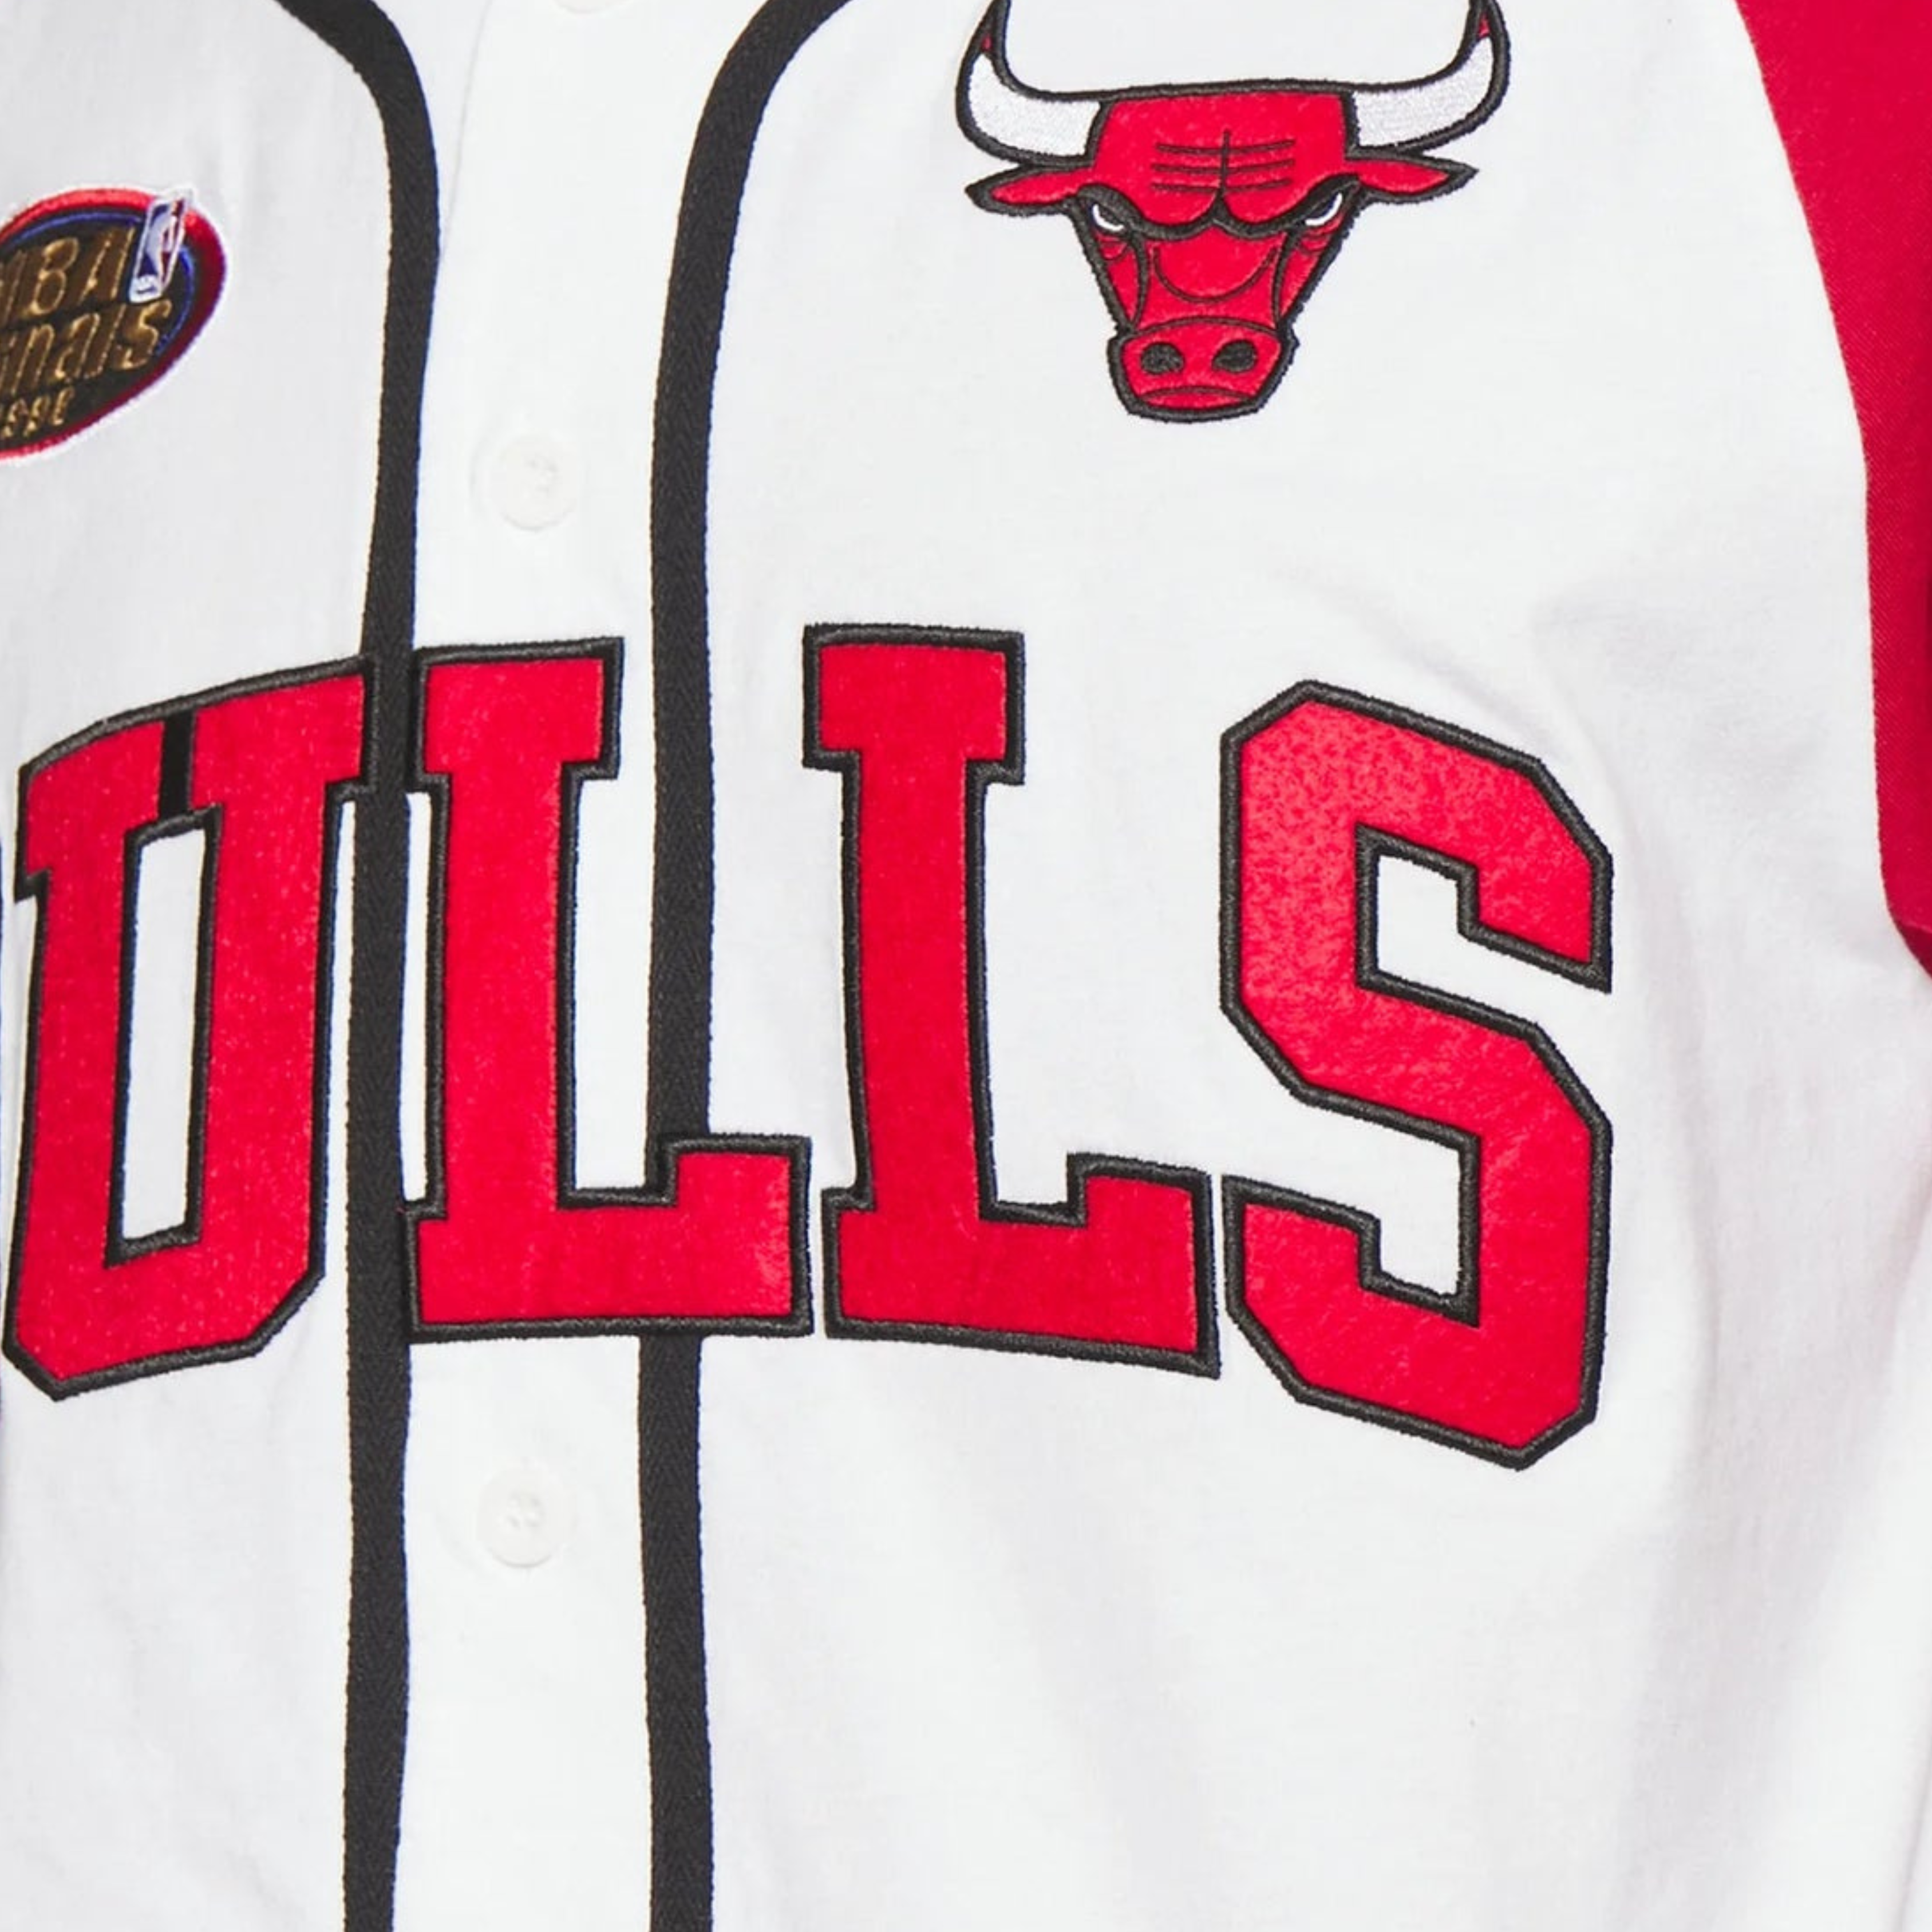 MITCHELL & NESS NBA CHICAGO BULLS PRACTICE DAY BUTTON FRONT